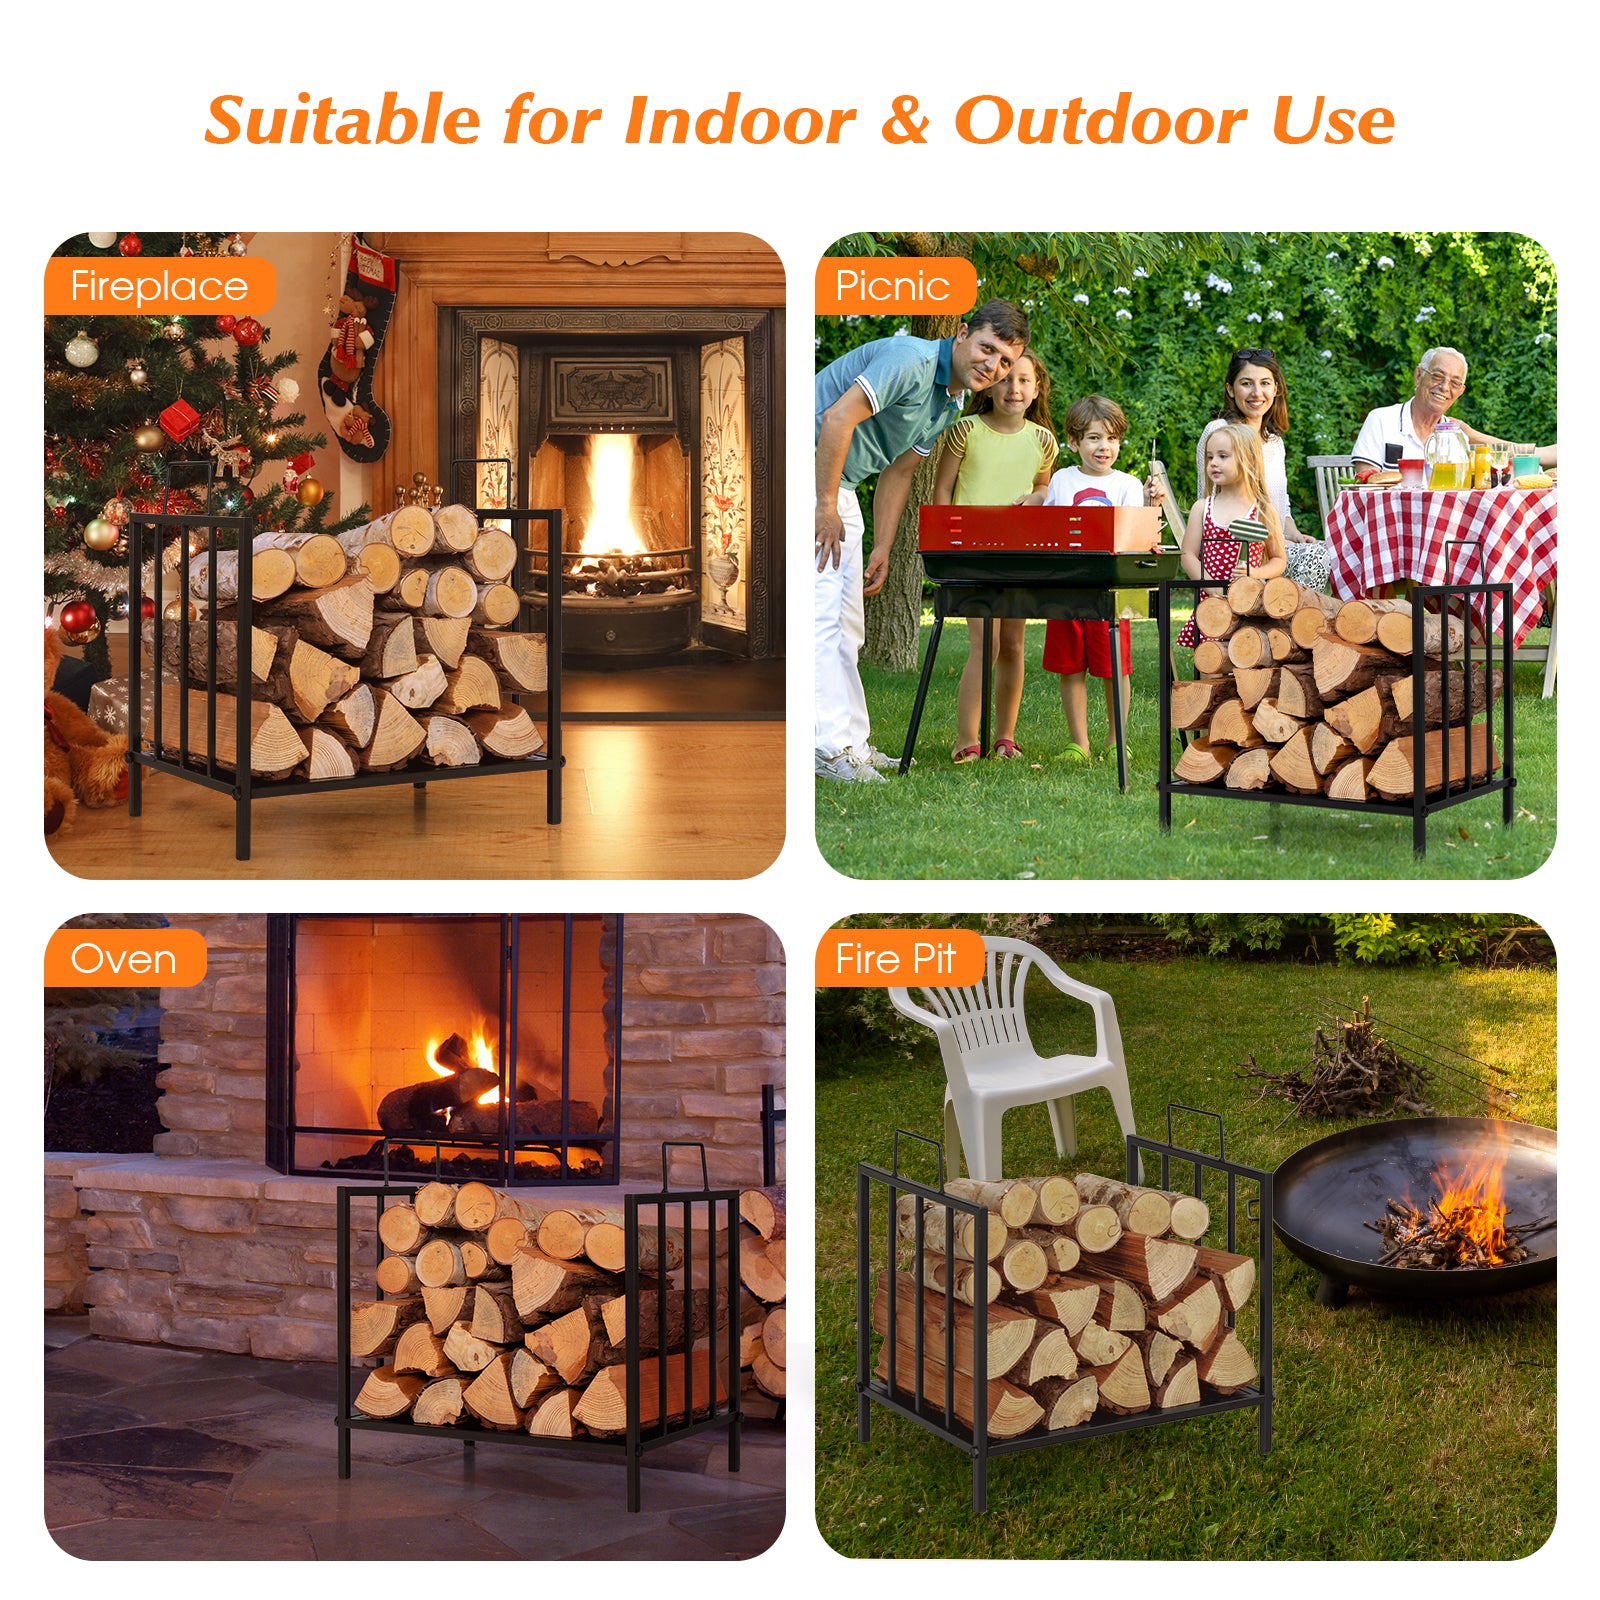 Firewood Log Rack with Convenient Handle and Raised Feet for Fireplace, Stove